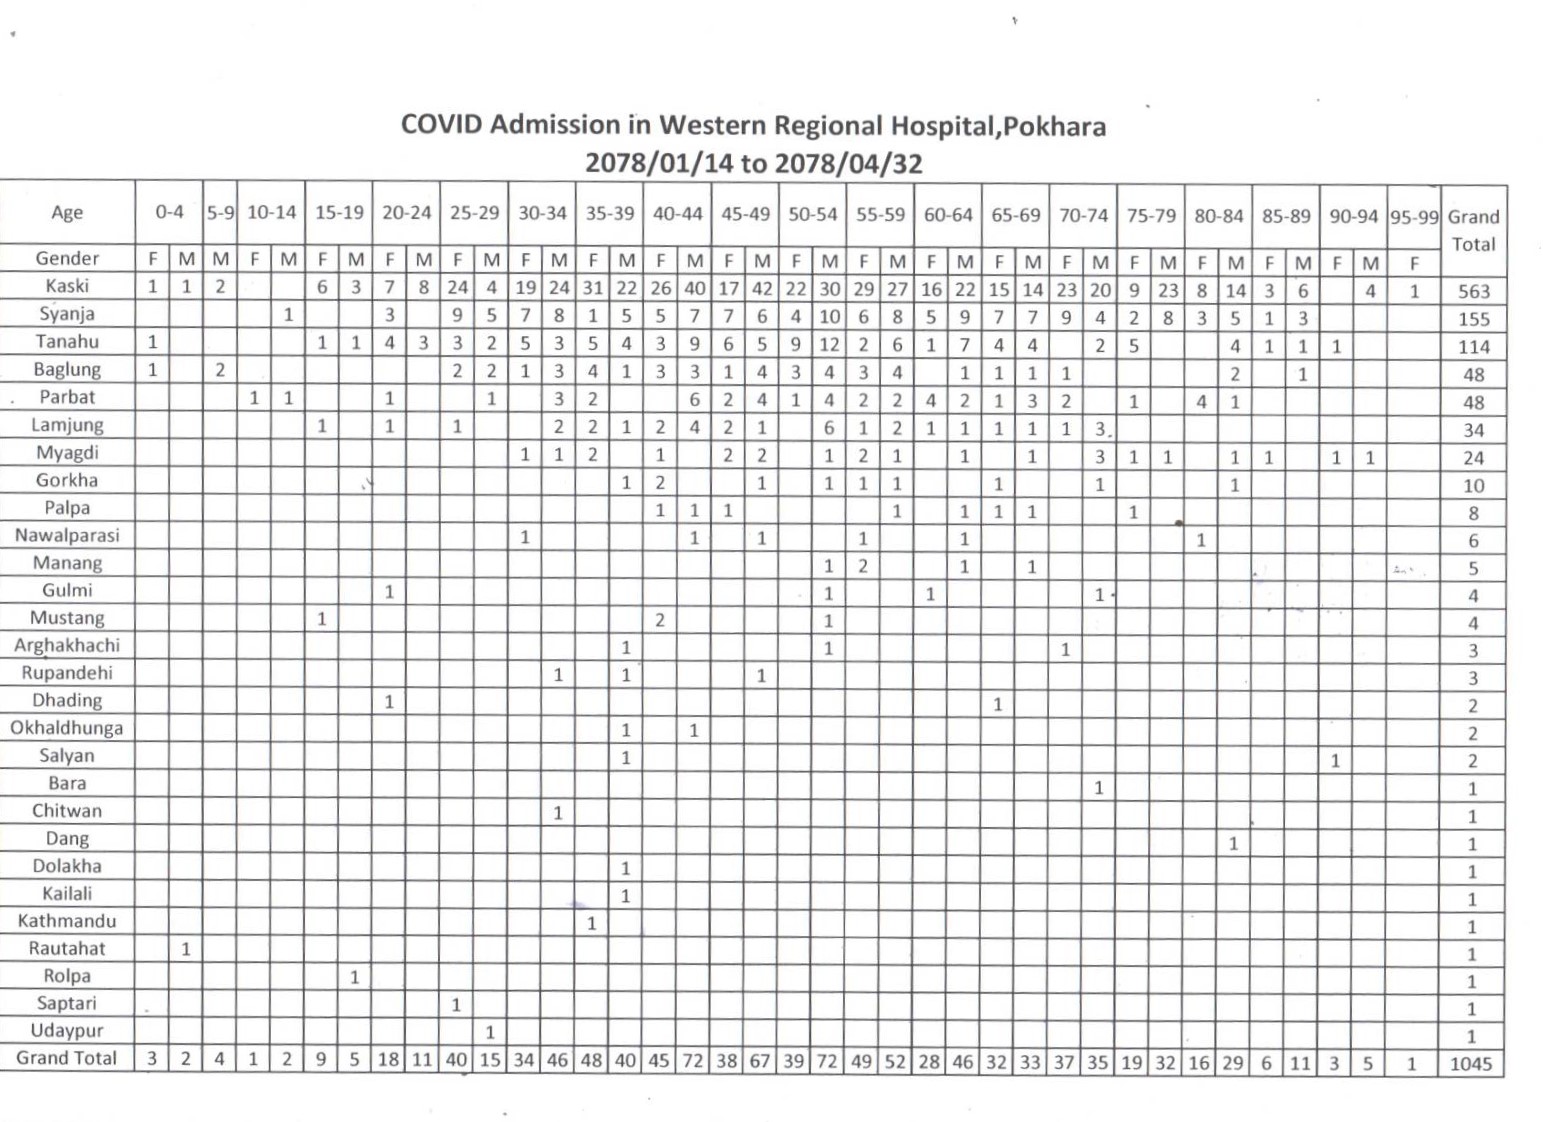 COVID data in WRH in reference to second wave